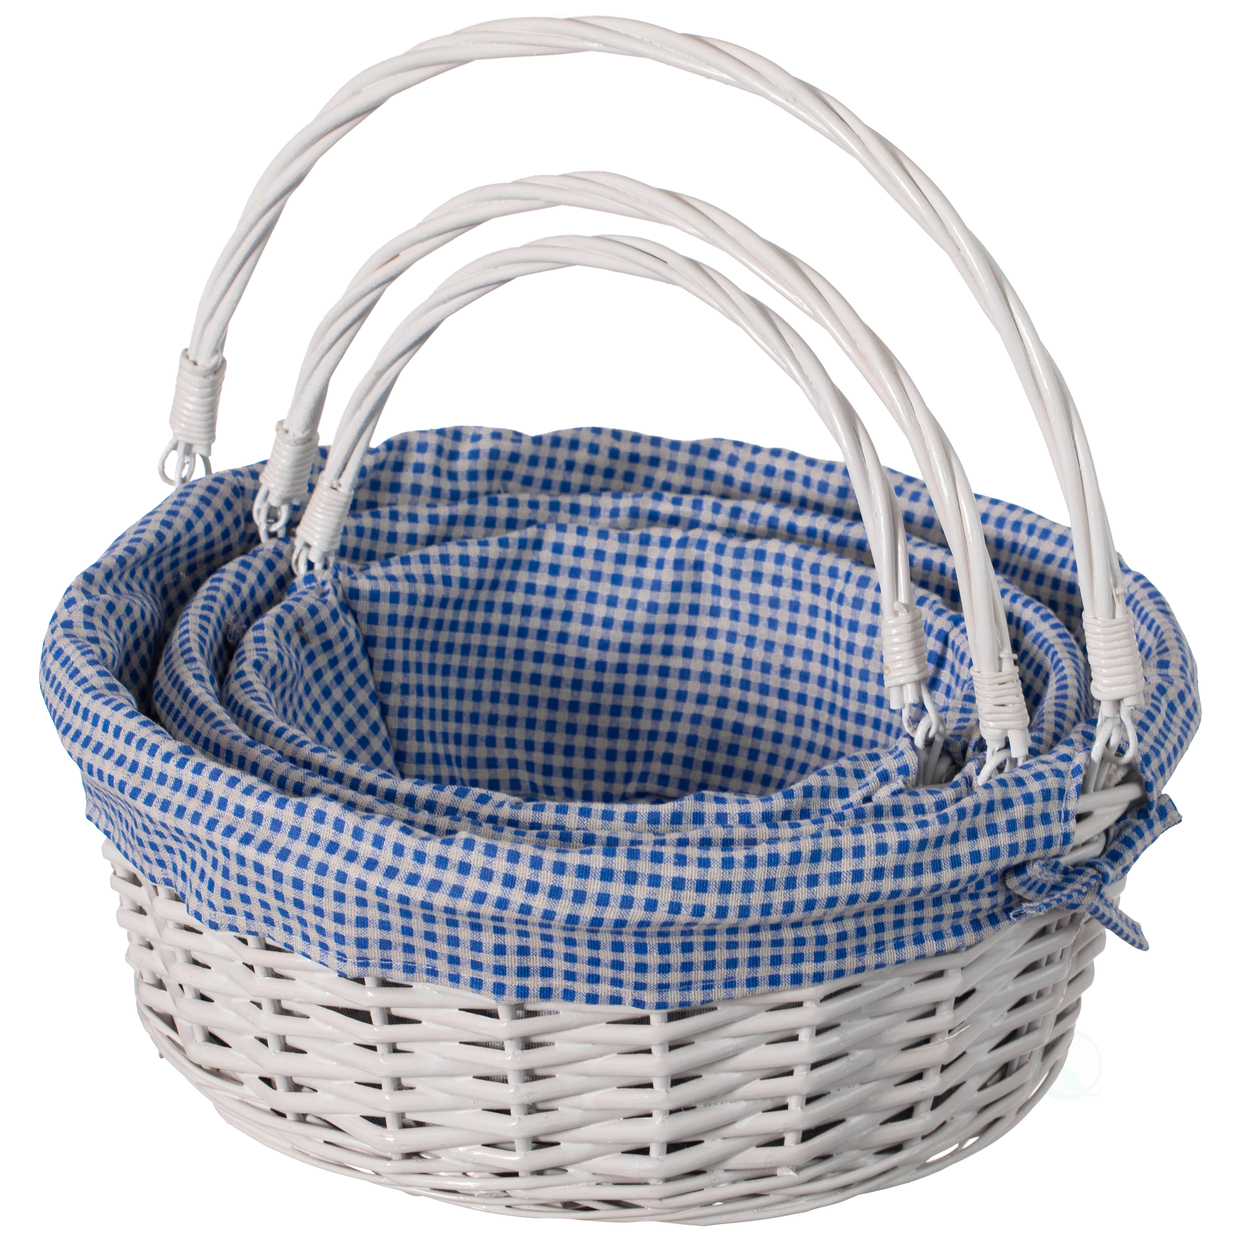 Traditional White Round Willow Gift Basket With Gingham Liner And Sturdy Foldable Handles, Food Snacks Storage Basket - Pink, Medium